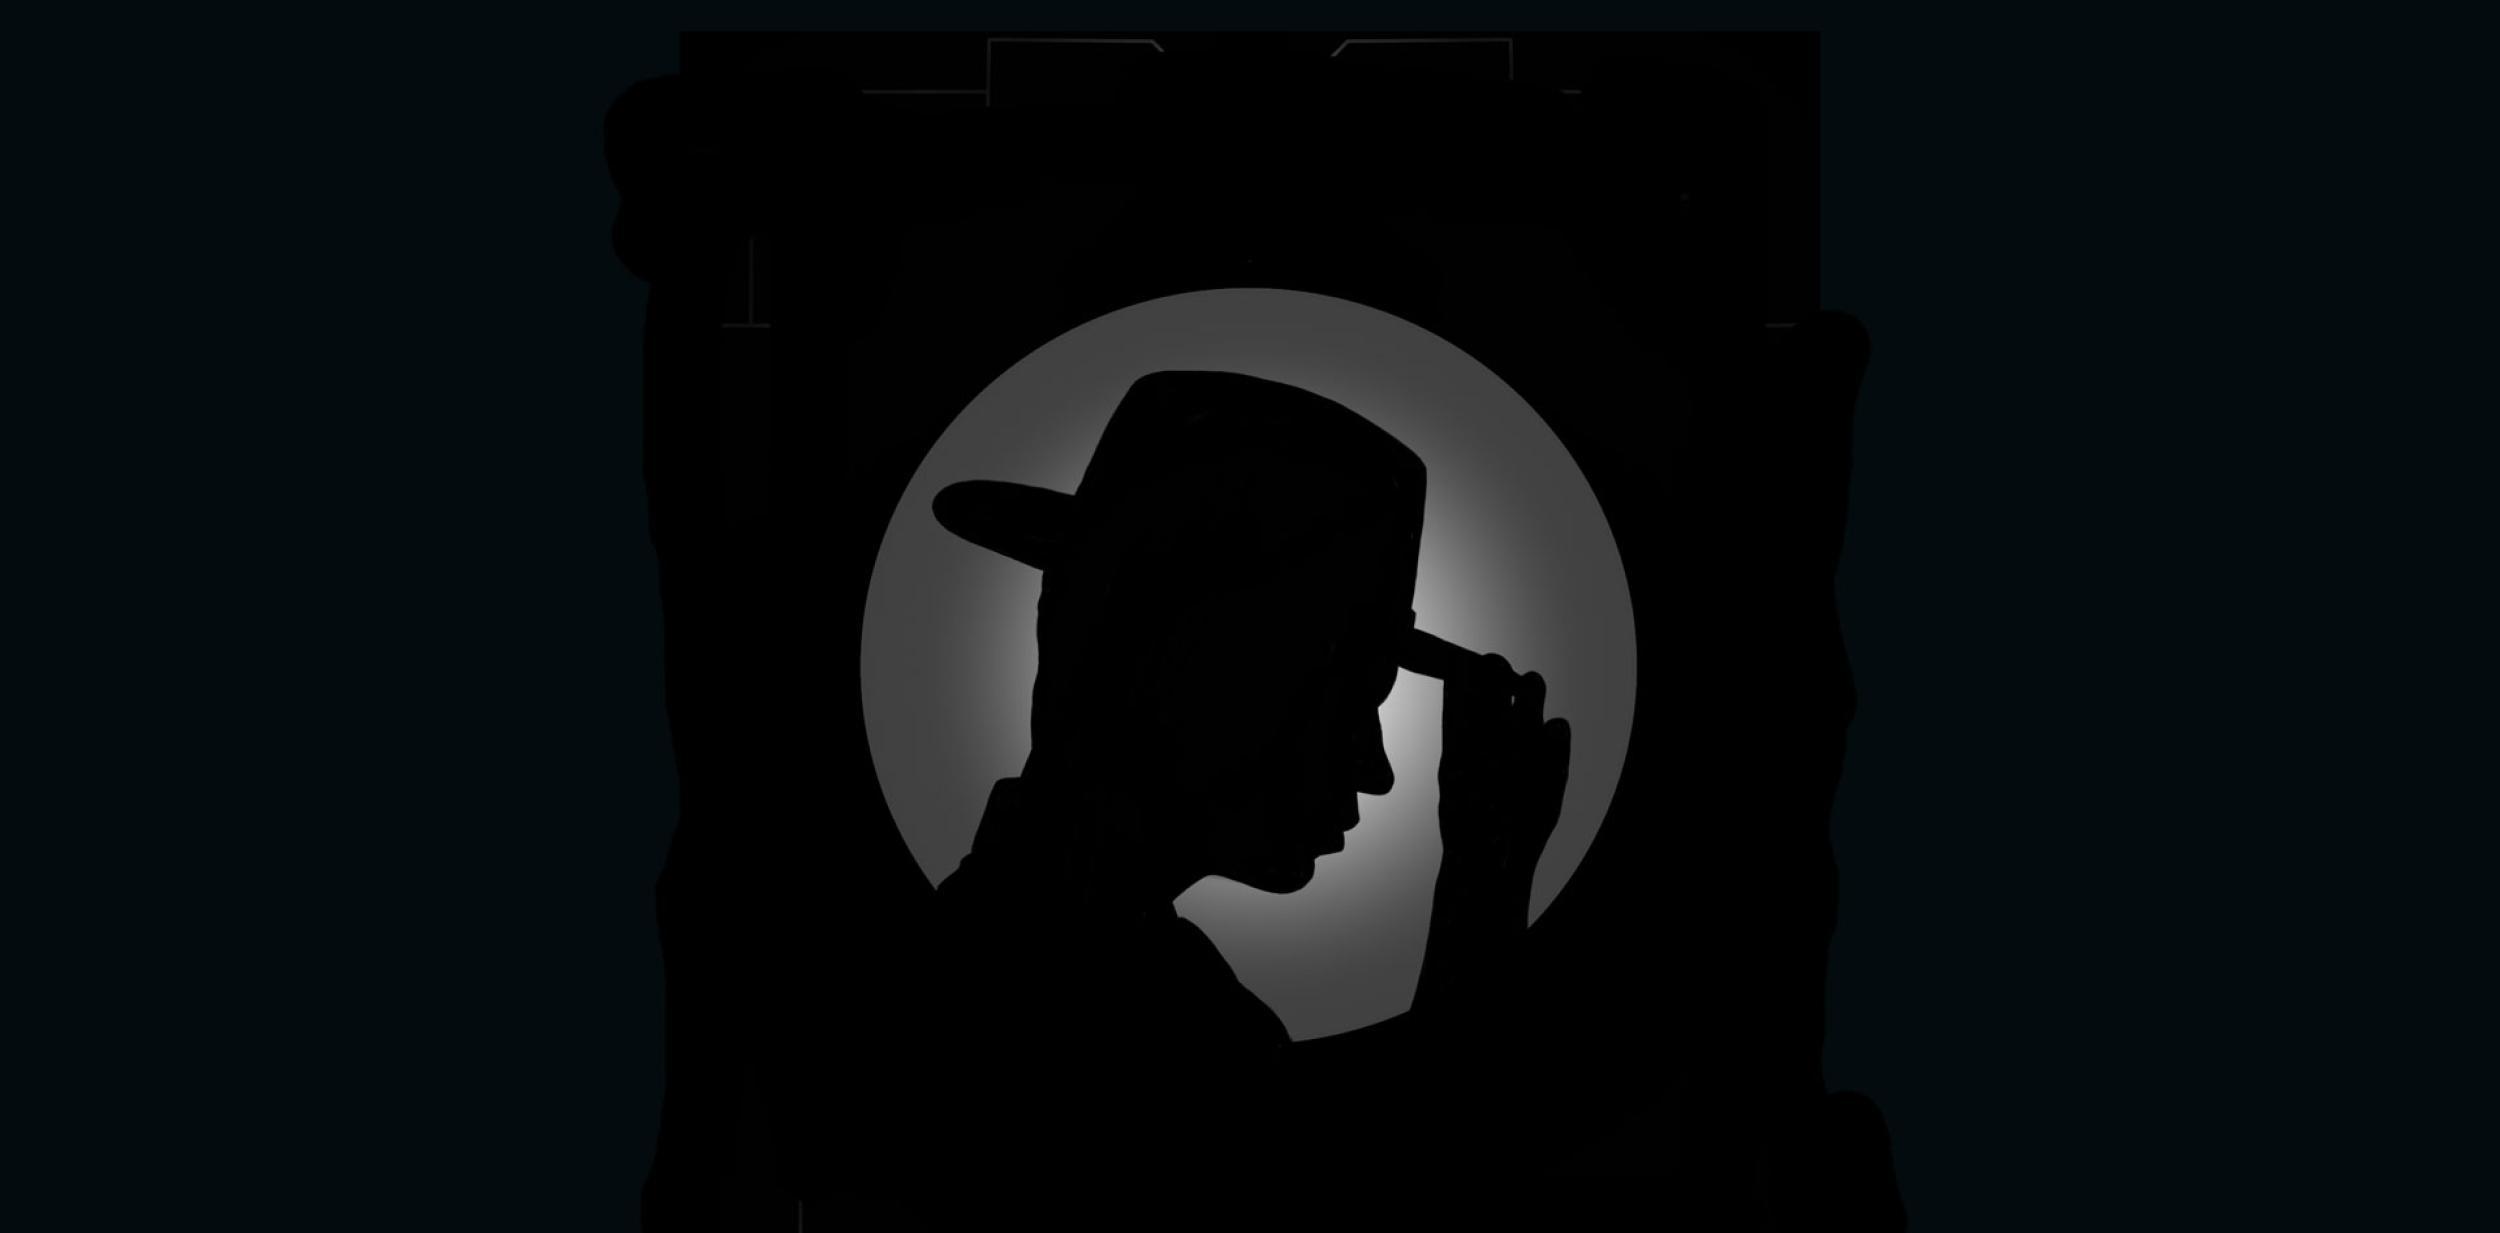 Silhouette of person wearing a fedora hat